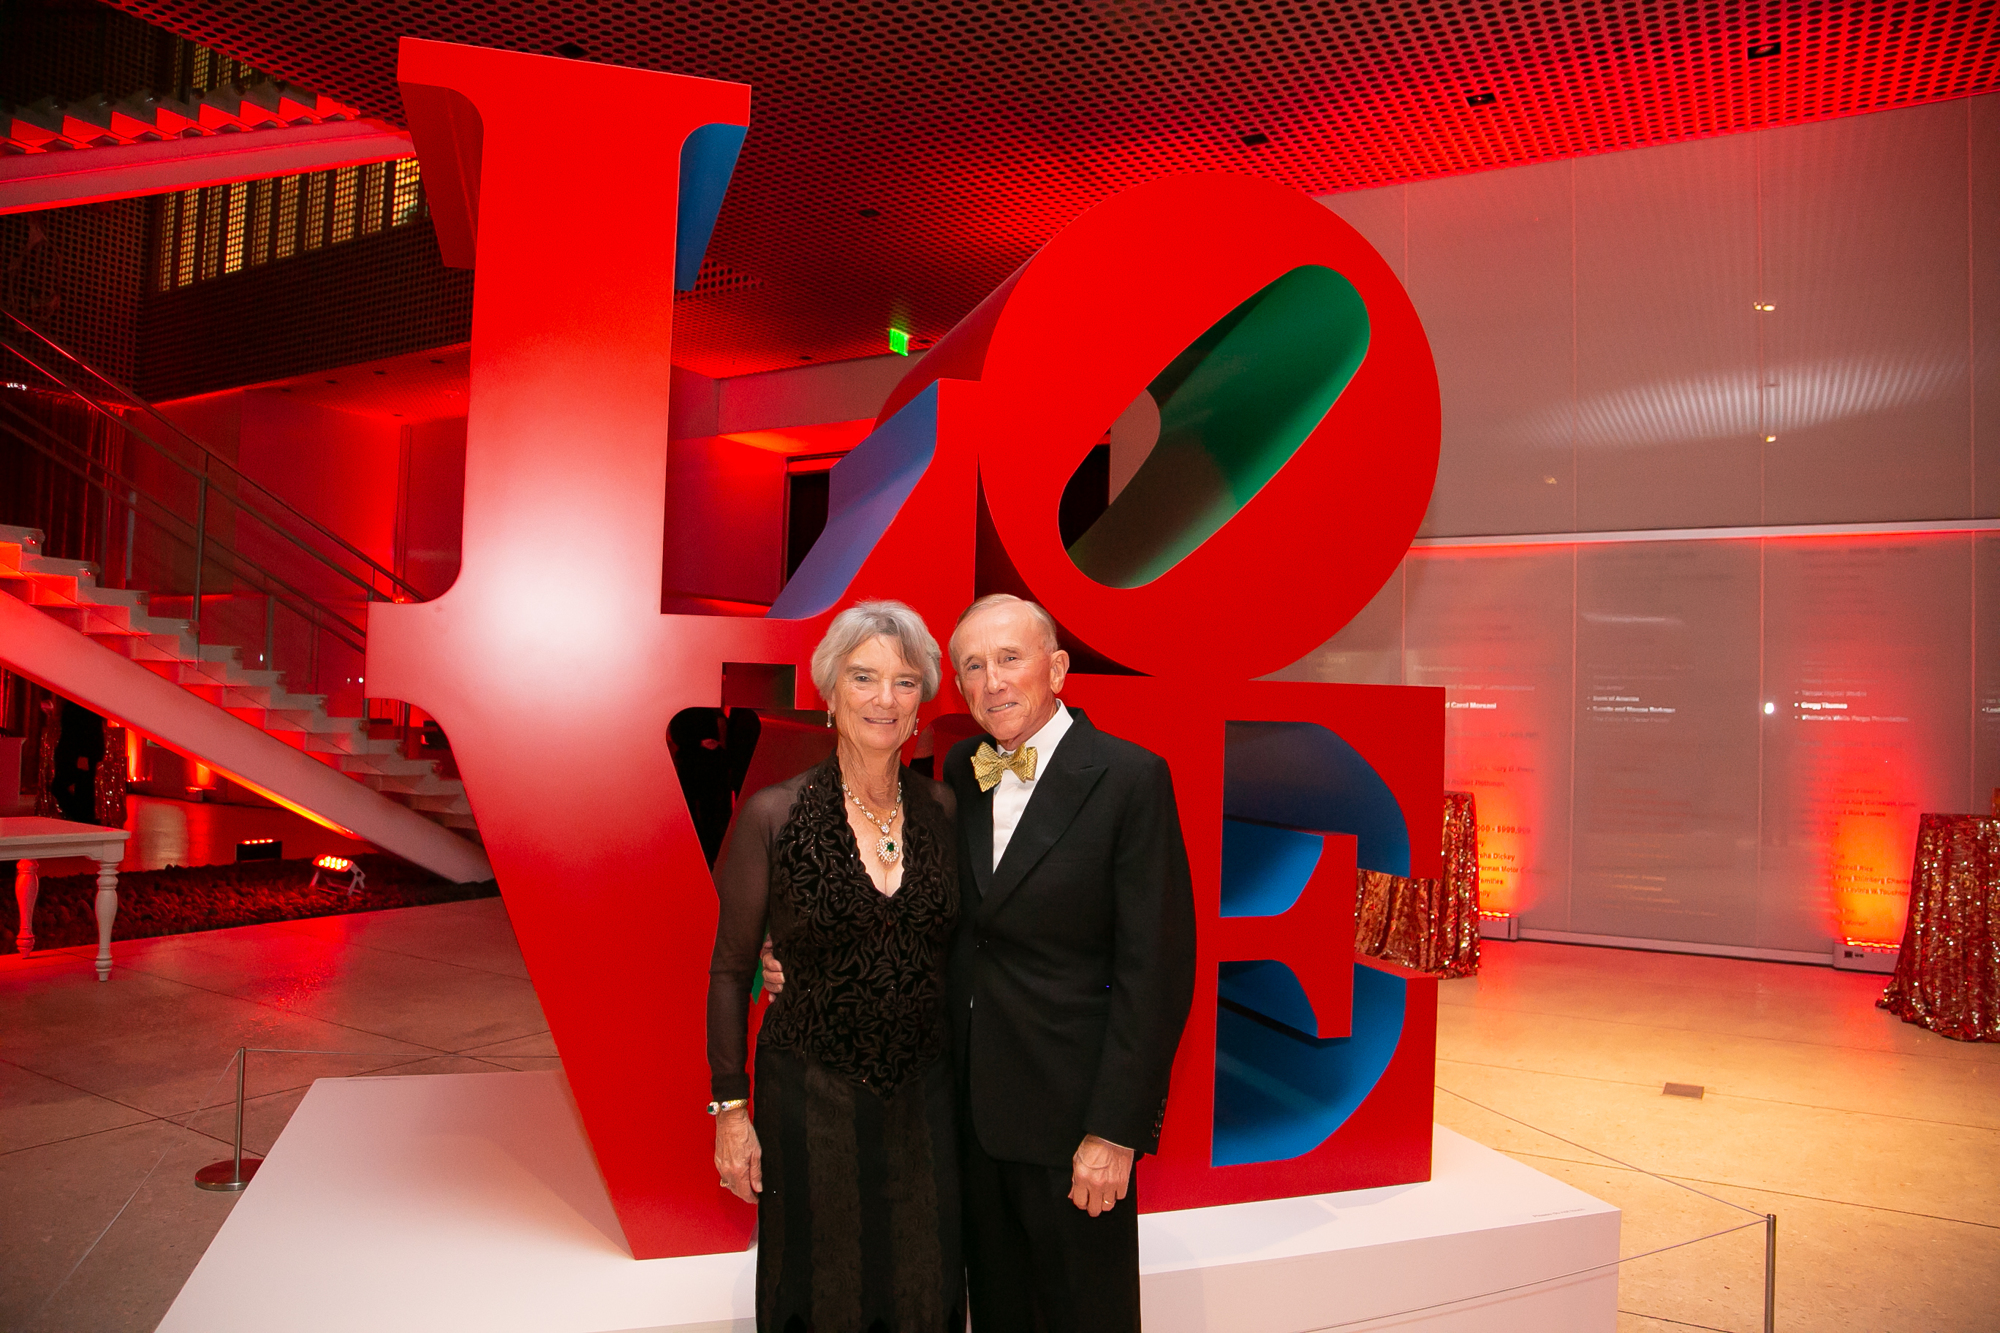 Dick and Cornelia Corbett are longtime supporters of the Tampa Museum of Art. (Courtesy photo)